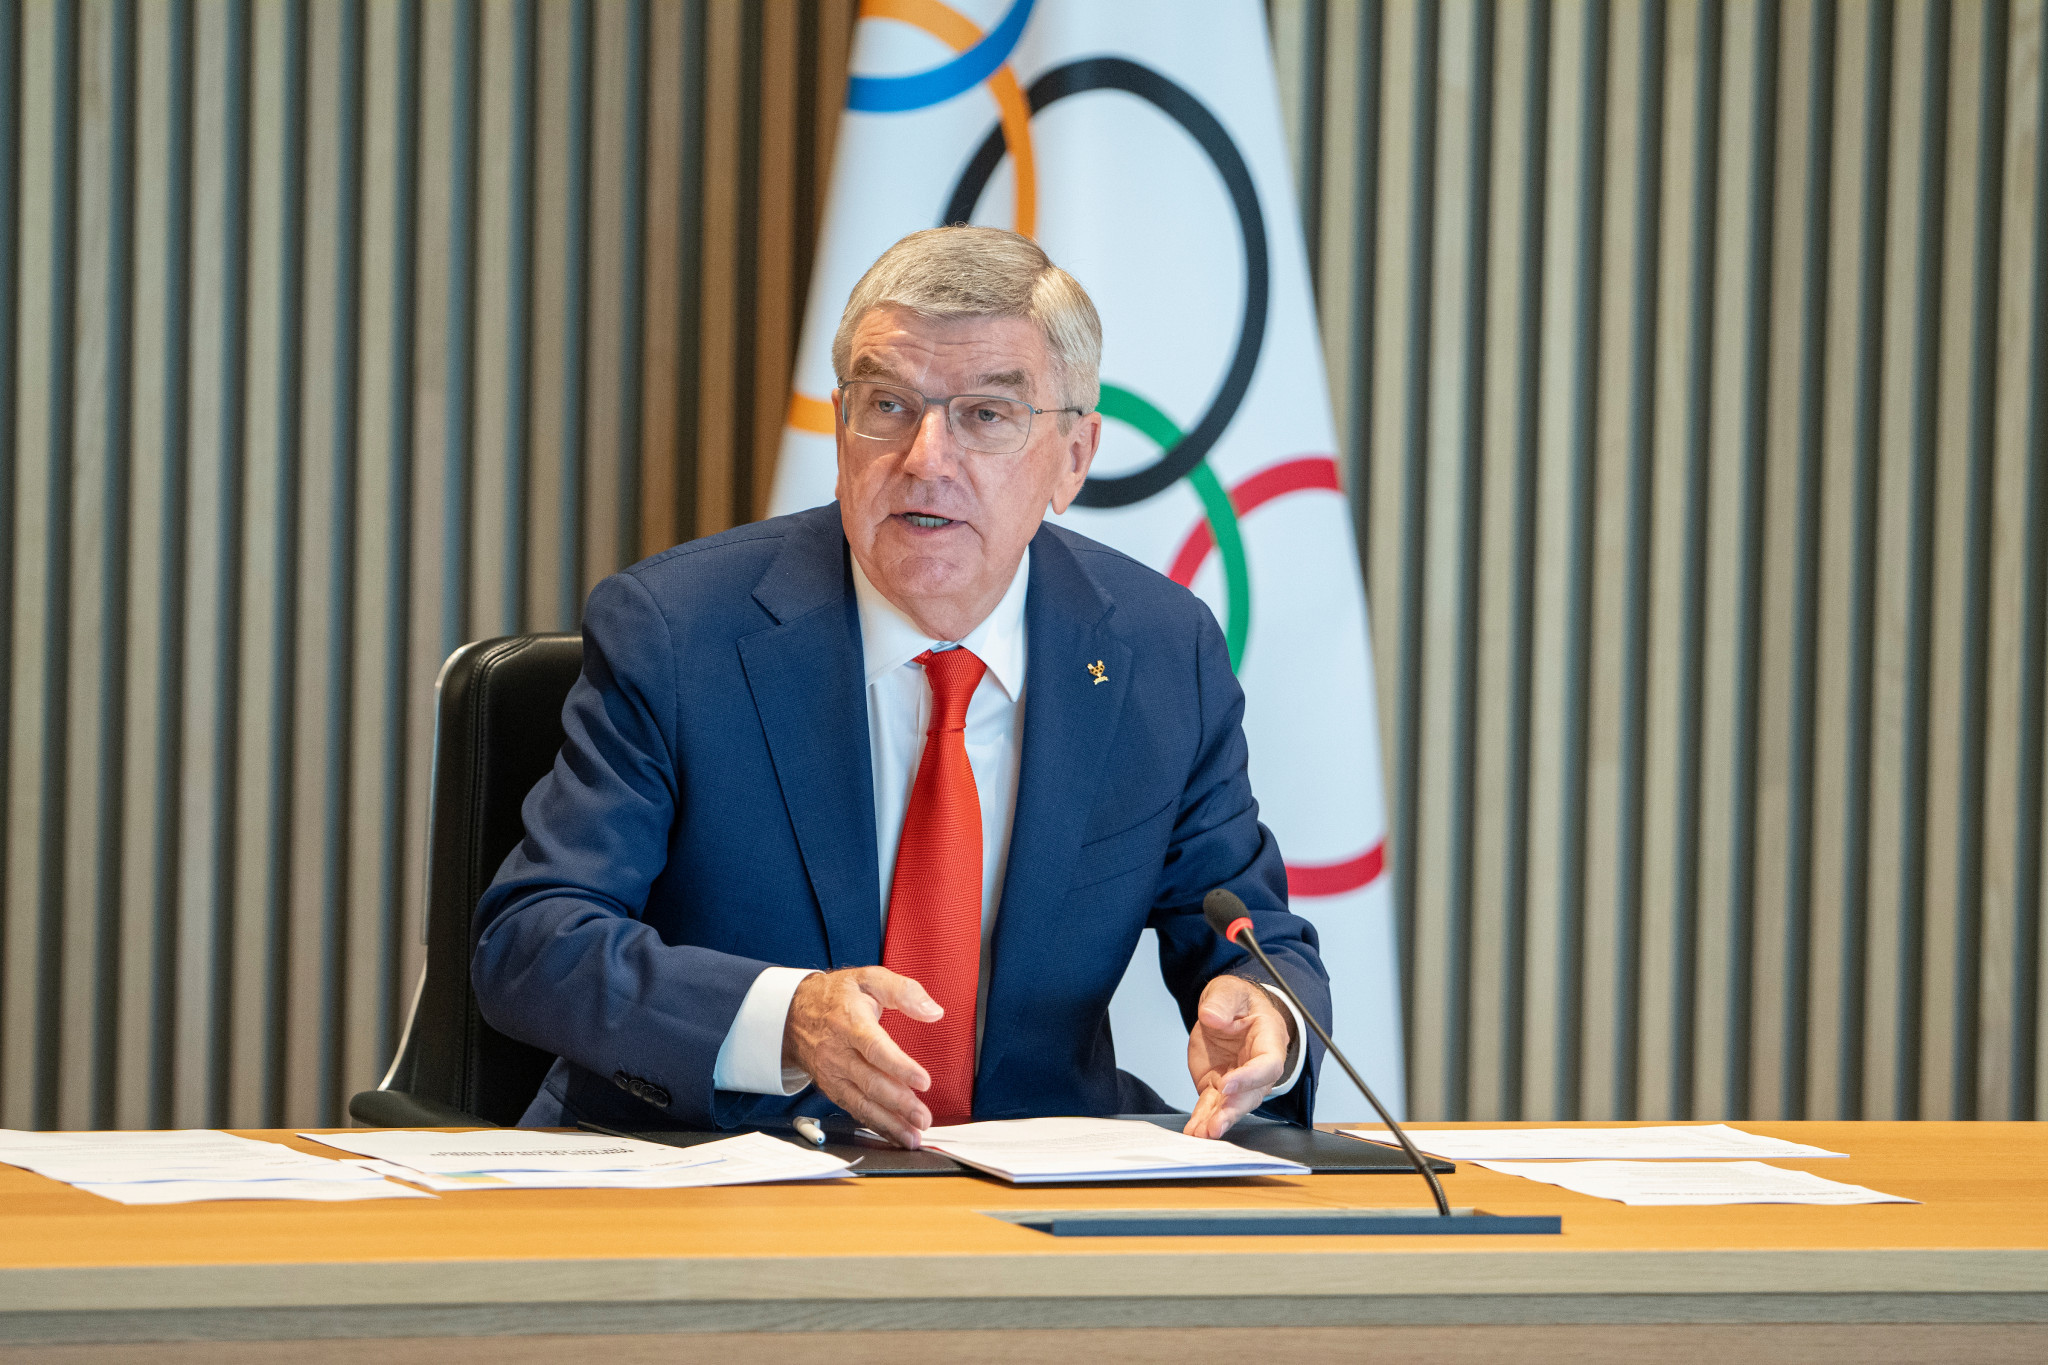 Bach states decision on Russia and Belarus at Paris 2024 unlikely before IOC Session